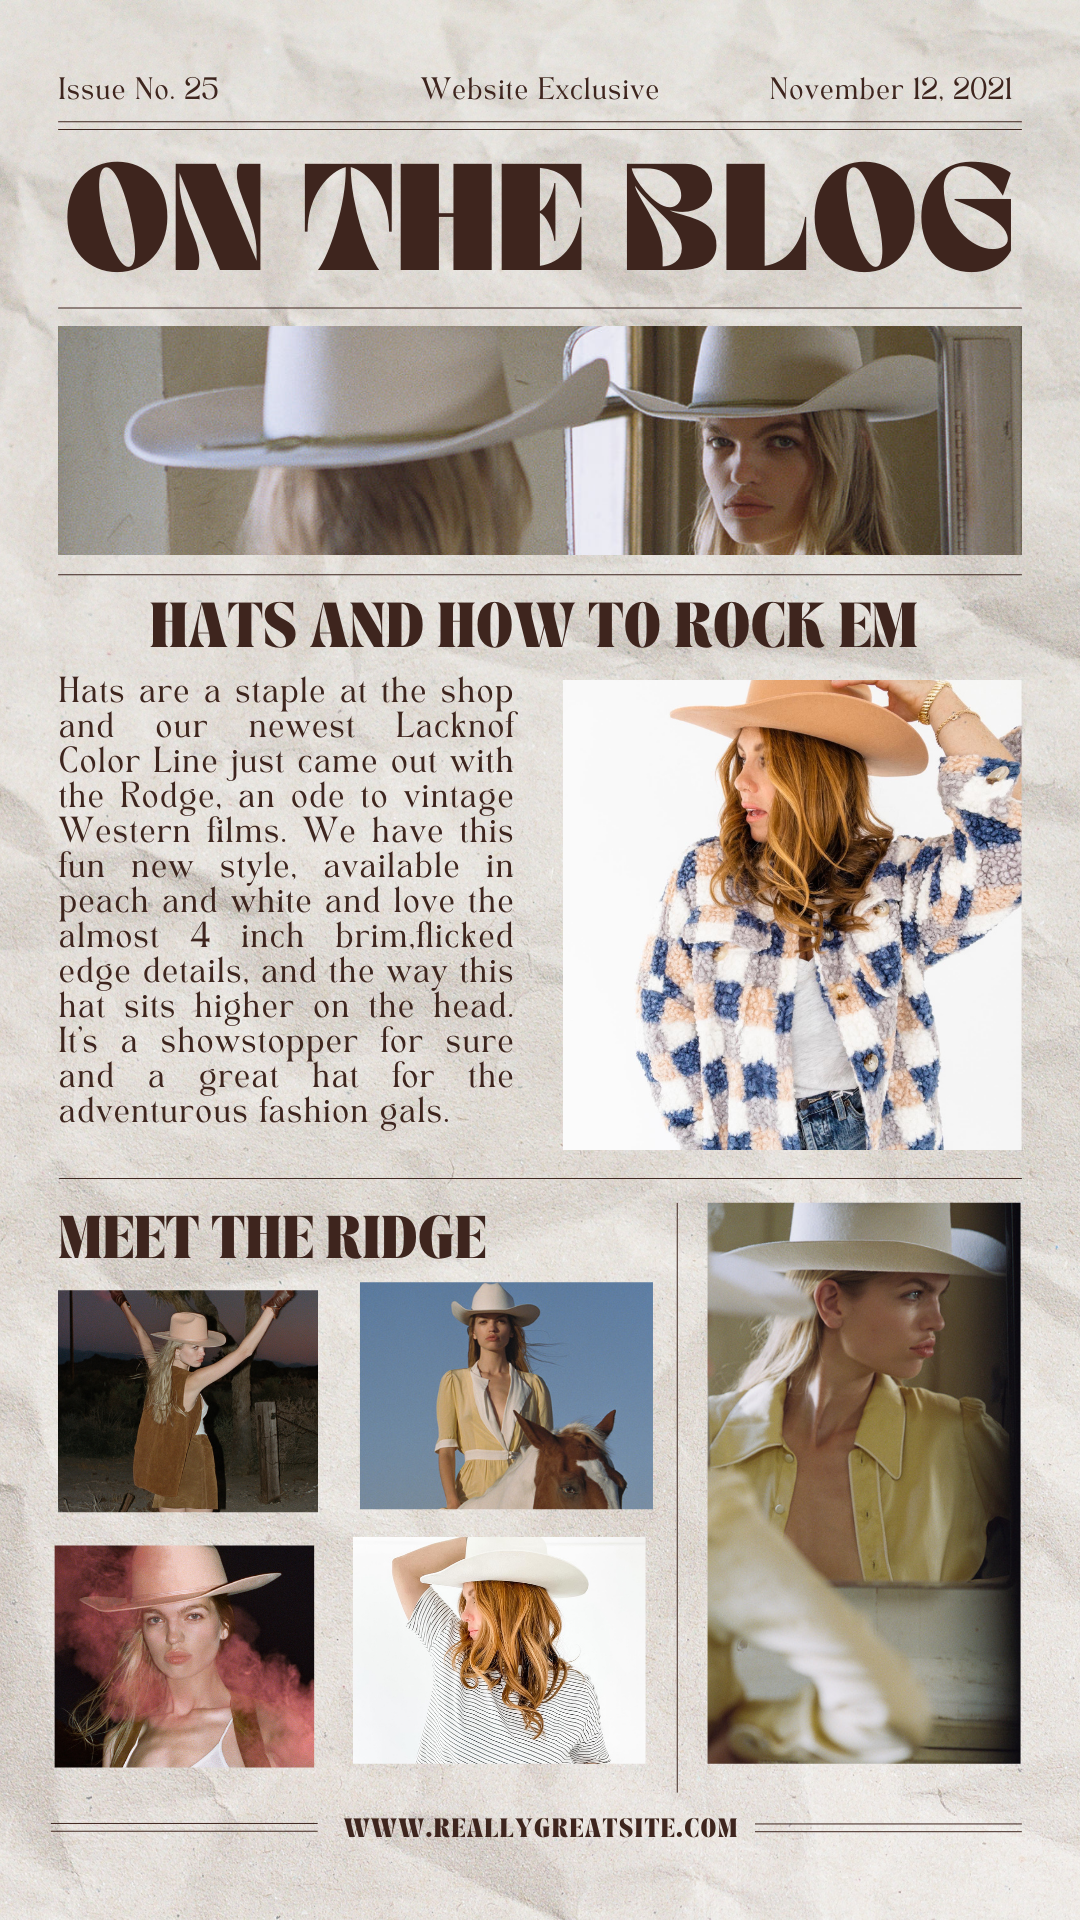 Meet The Ridge, Our Newest Lack of Color Hat Inspired By The Vintage West + Check Out Our Hat Guide For Finding The Perfect Lid